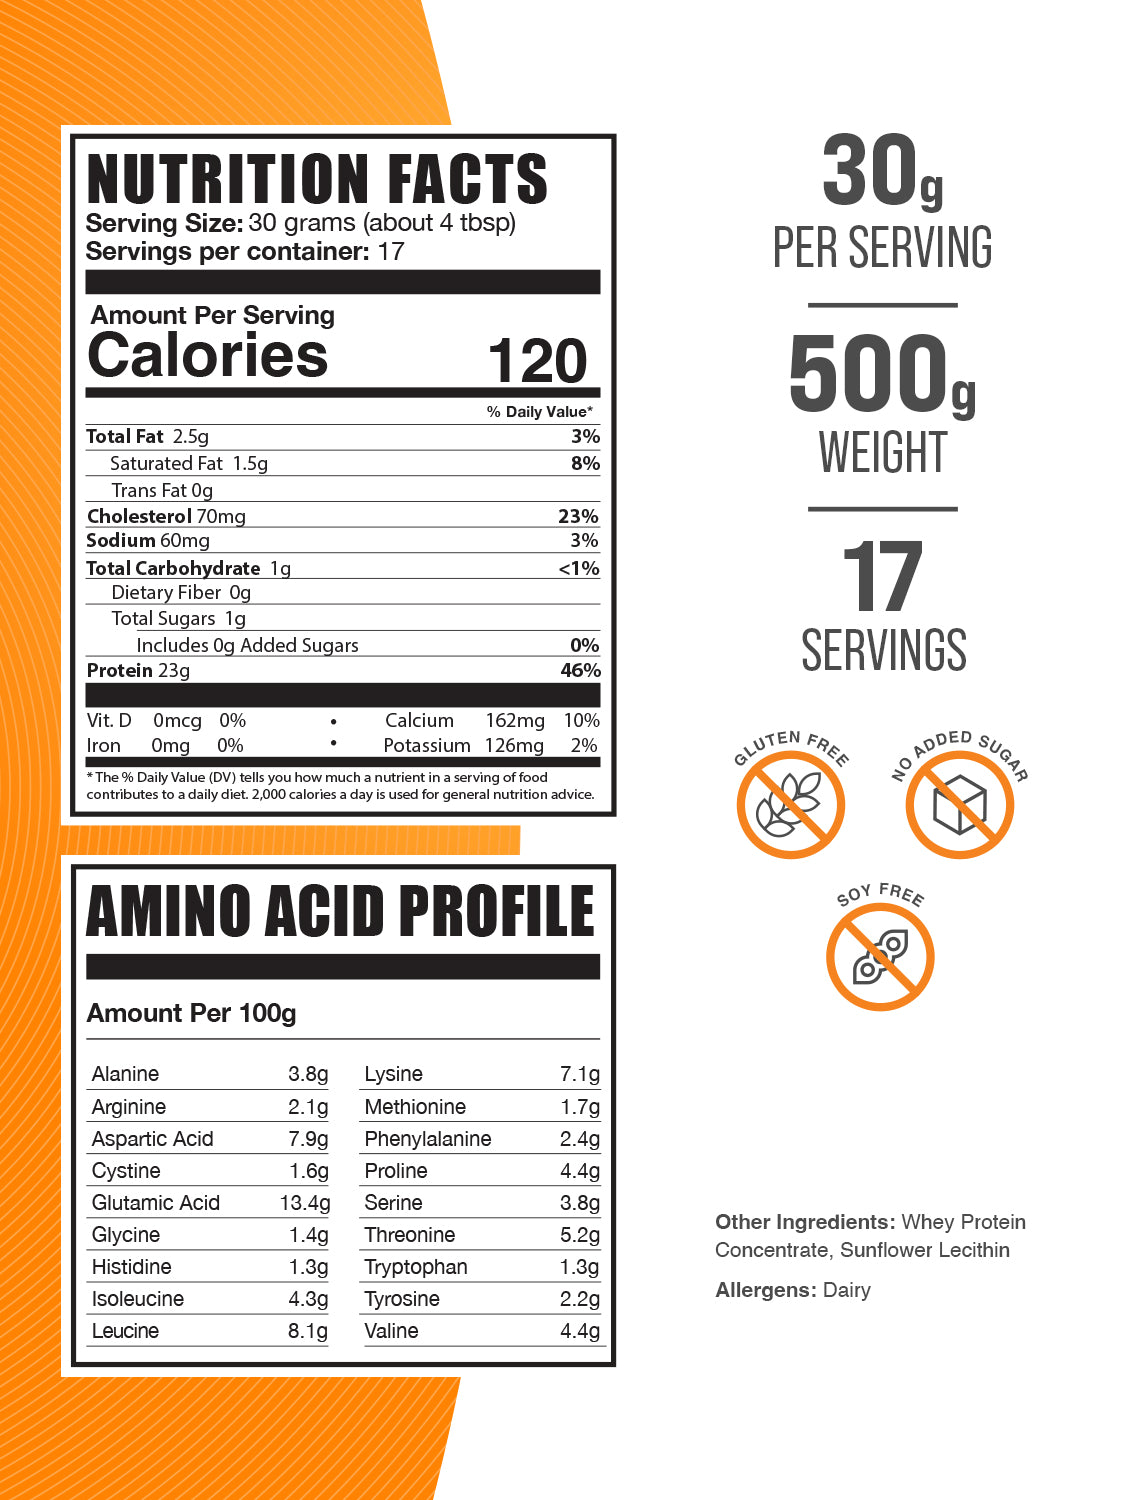 whey protein concentrate 500g label